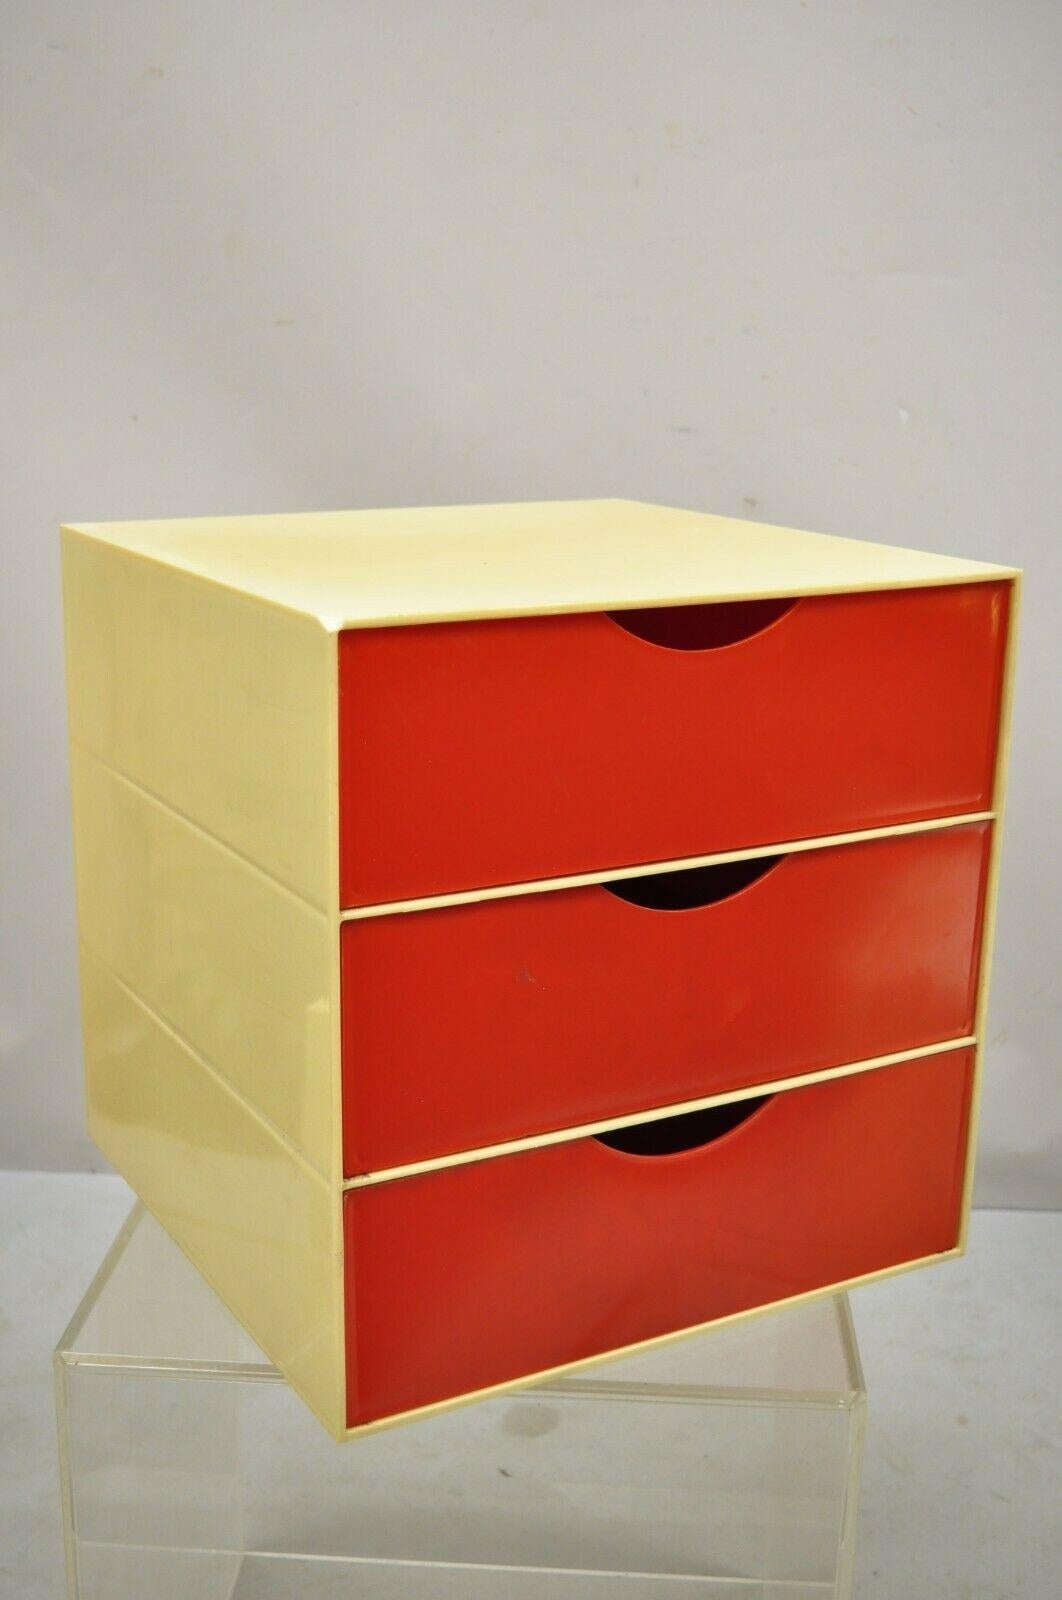 Vintage Joe Colombo Palaset style plastic red 3 drawer cube (B). Item features 3 sliding drawers, molded plastic construction, unmarked, in the style of Joe Colombo, very nice vintage item, clean modernist lines.*Listing is for one piece. Circa